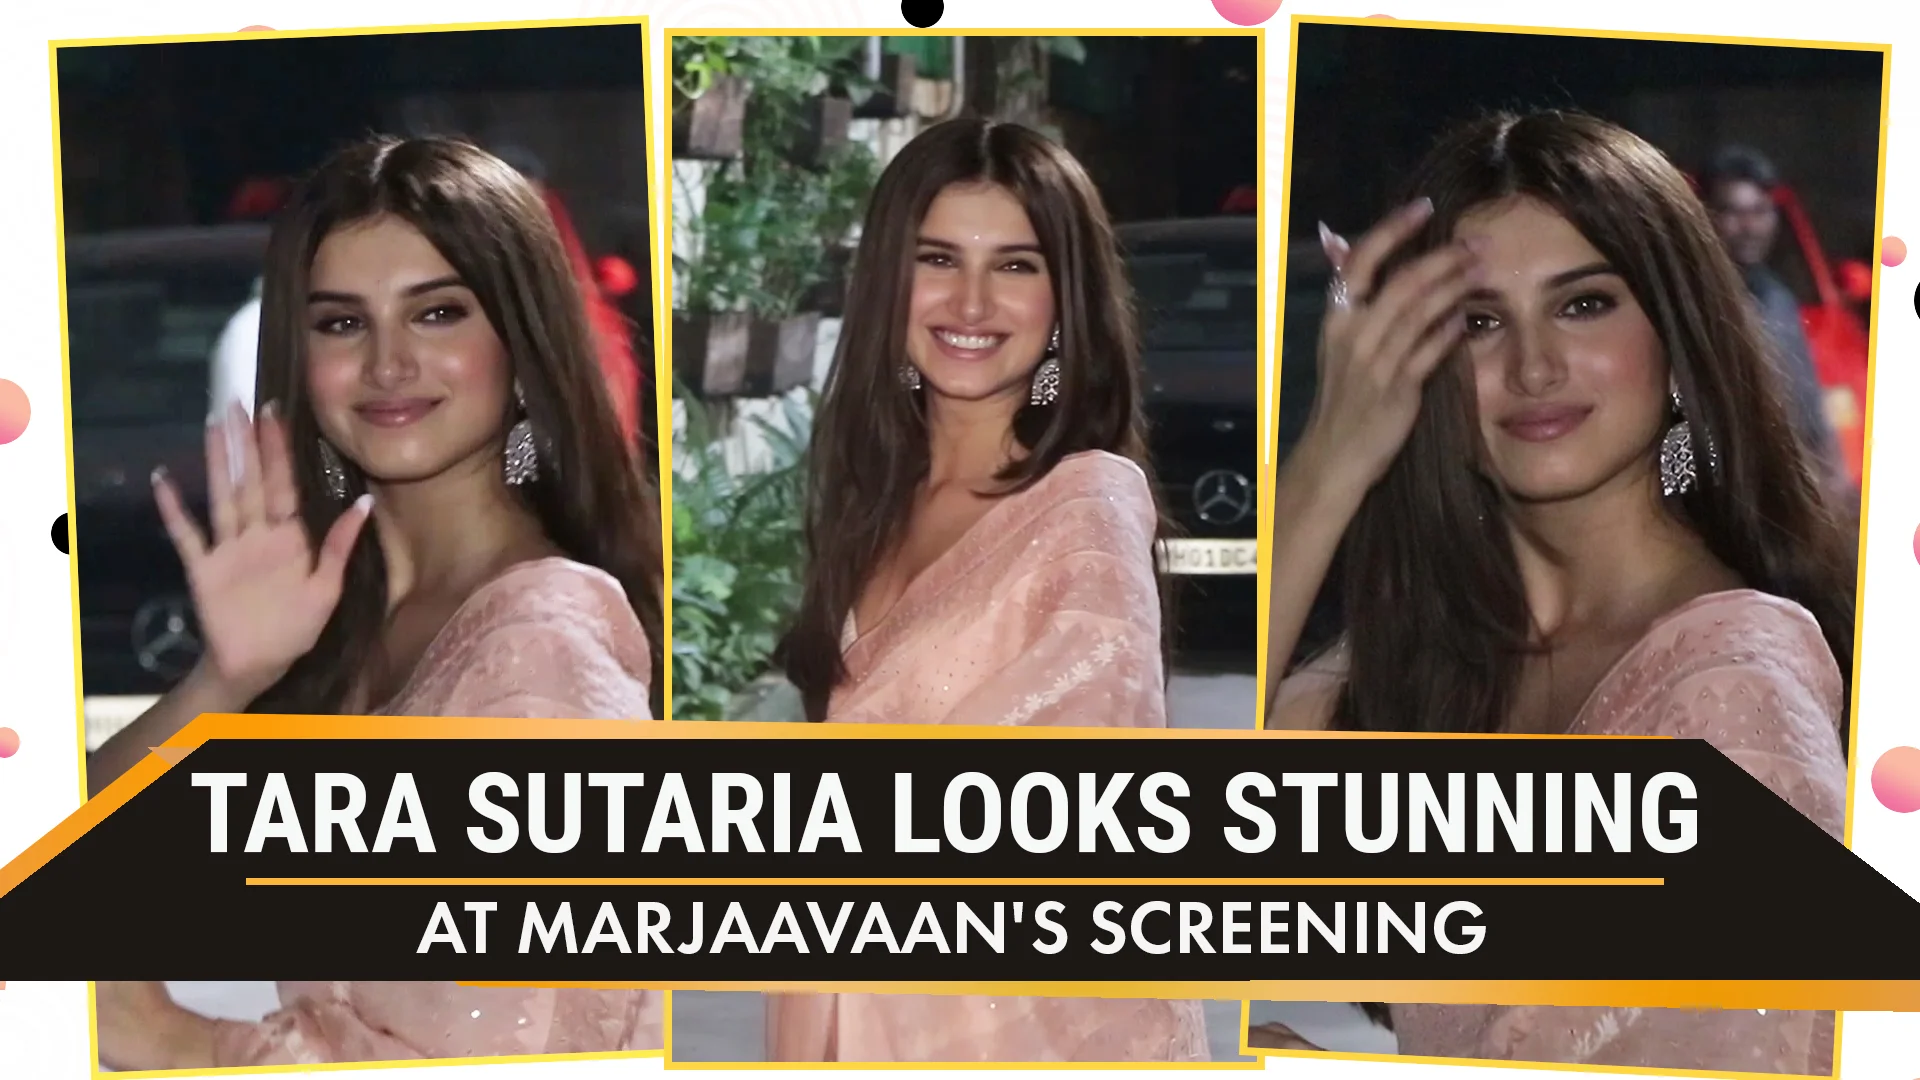 Tara Sutaria in stunning saree and bralette channels her inner desi girl  for Marjaavaan screening - India Today